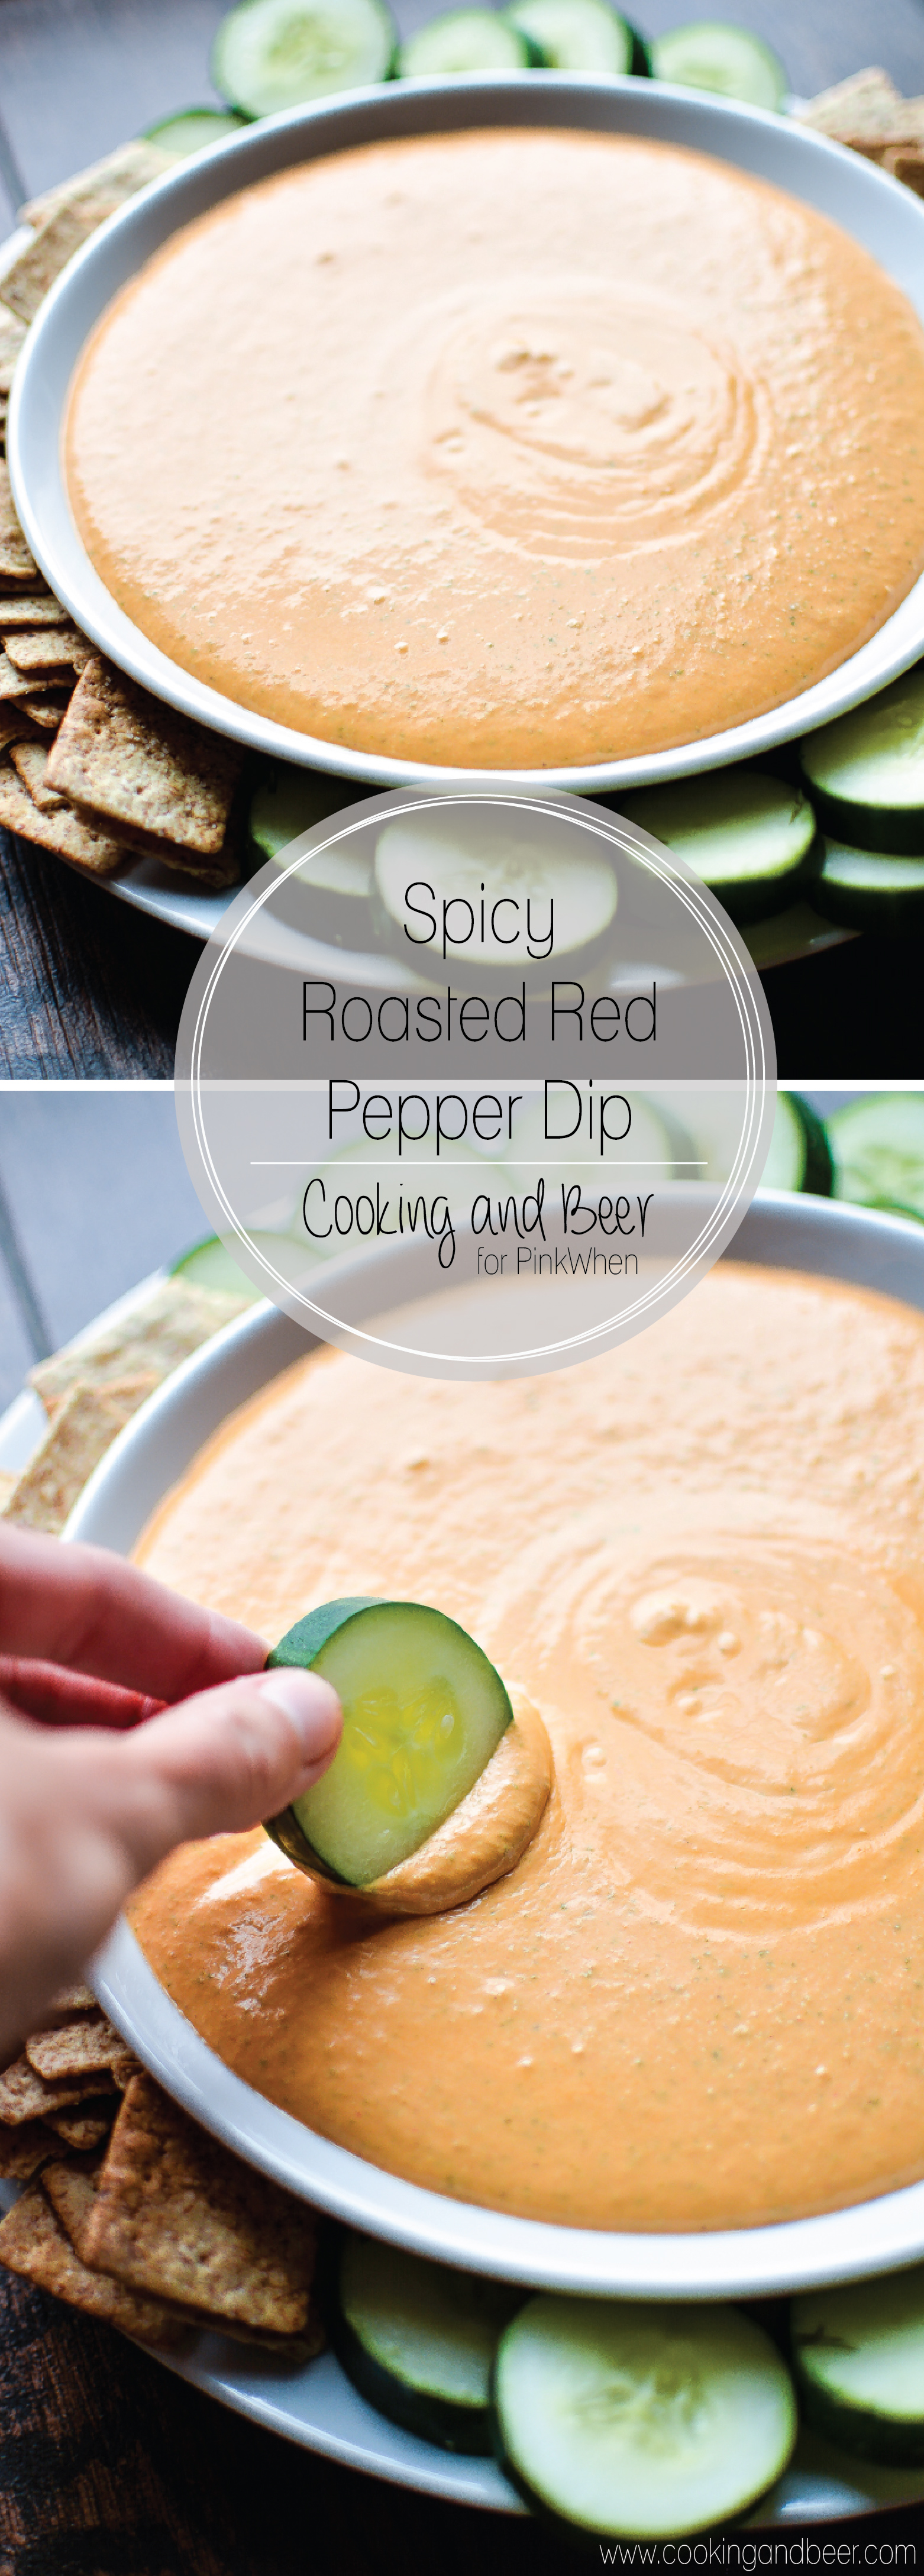 Spicy Roasted Red Pepper Dip: a quick, refreshing and delicious appetizer recipe that's perfect for your next gameday party!